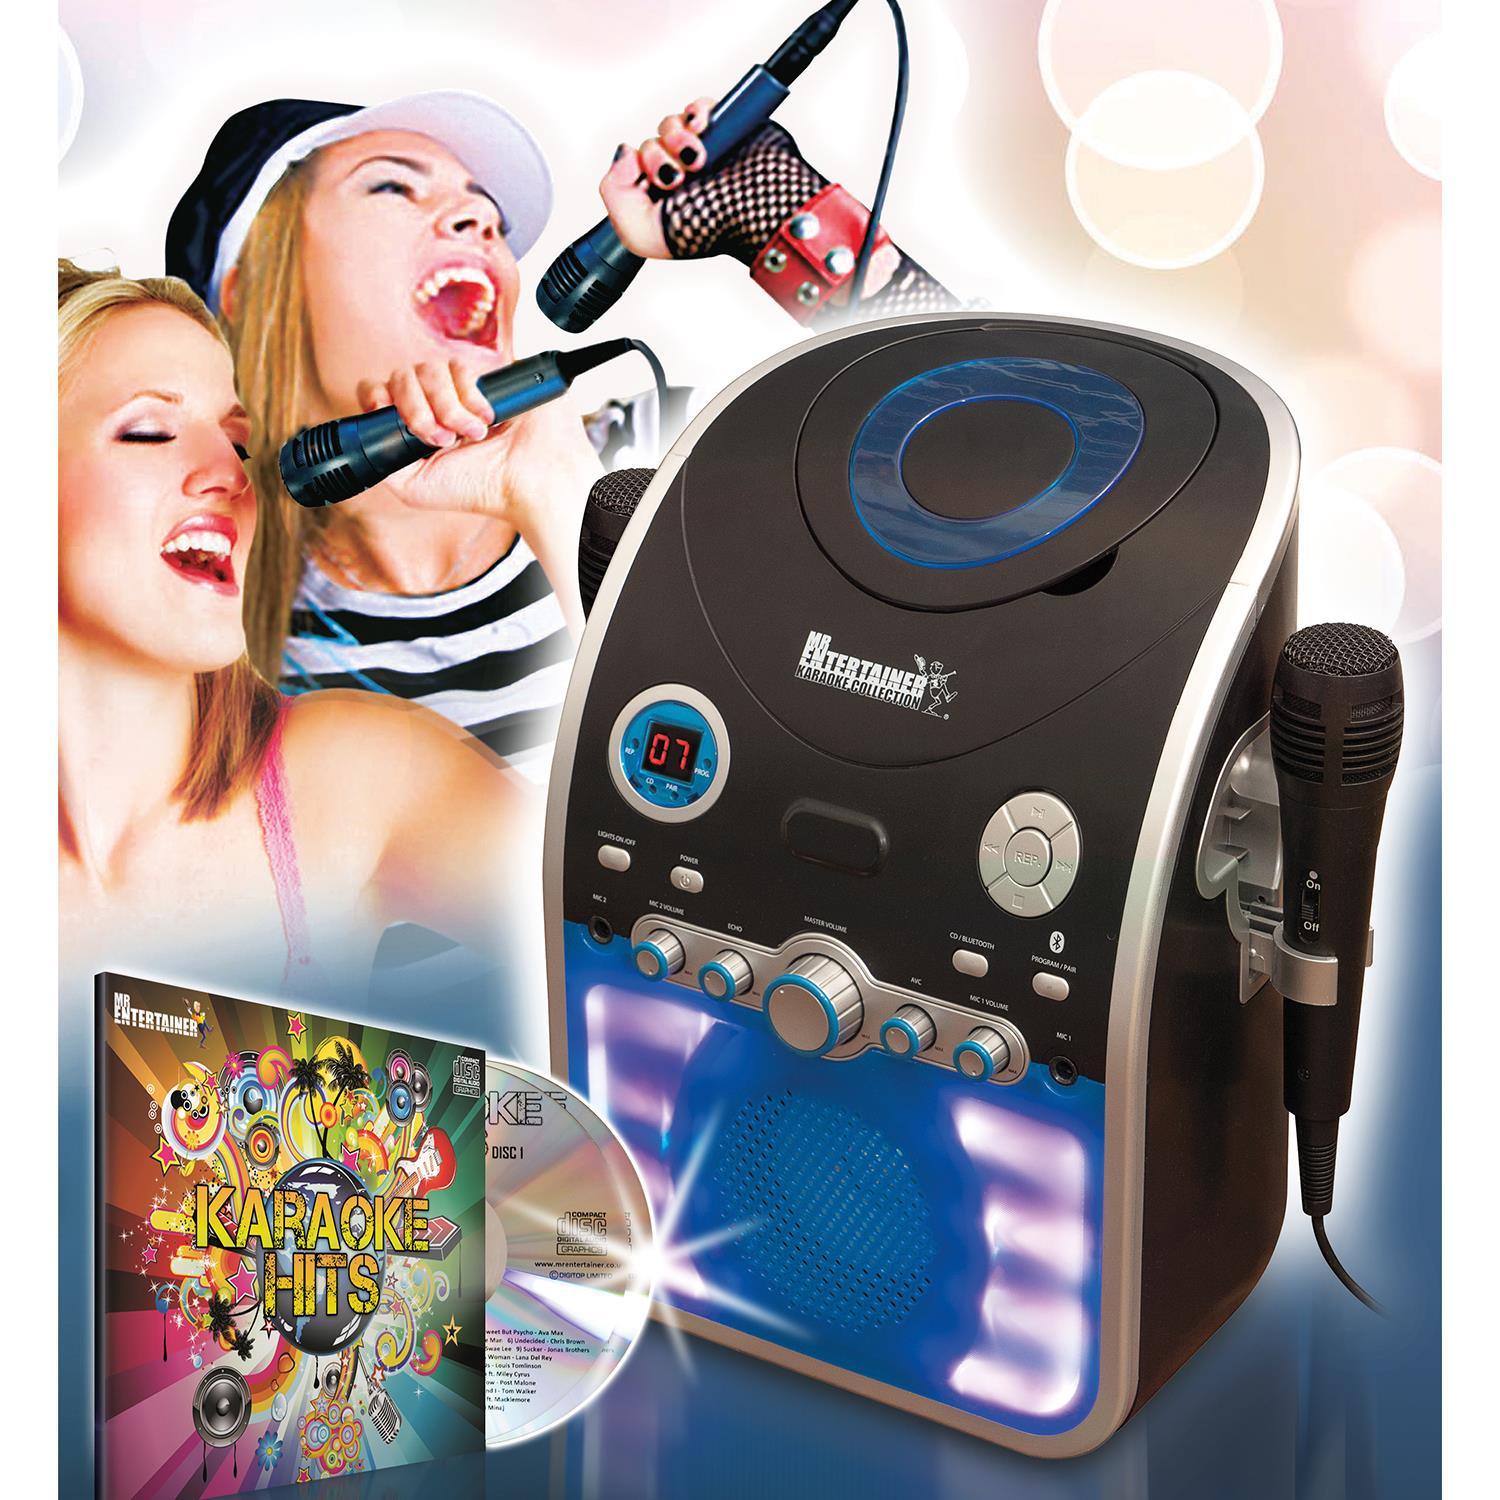 Mr Entertainer CDG Karaoke Machine With Bluetooth, CD, Lights - DY Pro Audio